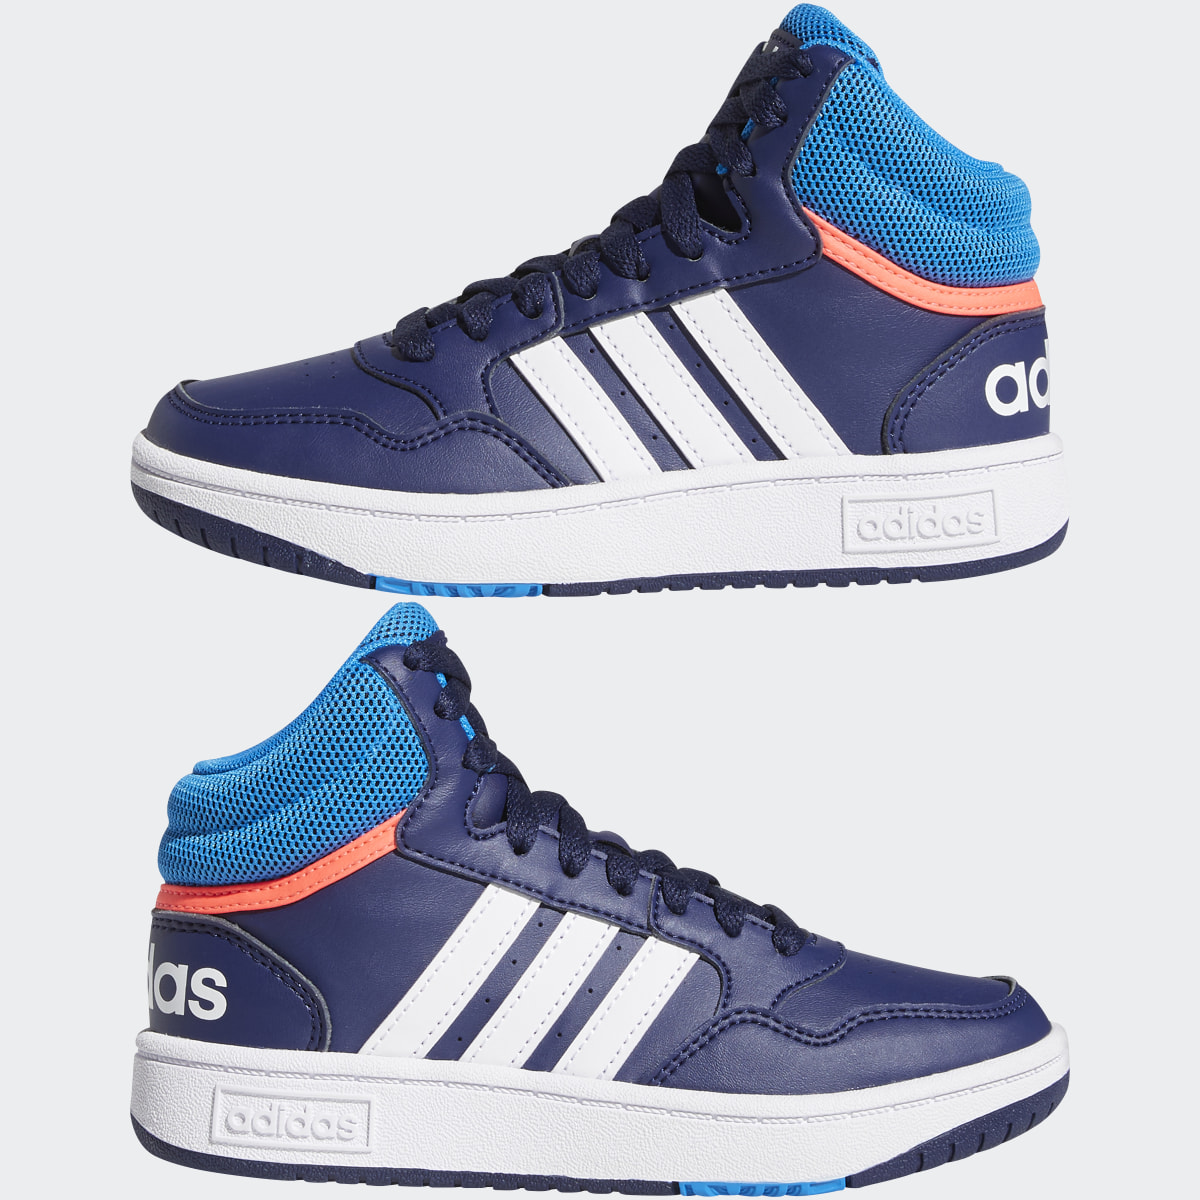 Adidas Hoops Mid Shoes. 8